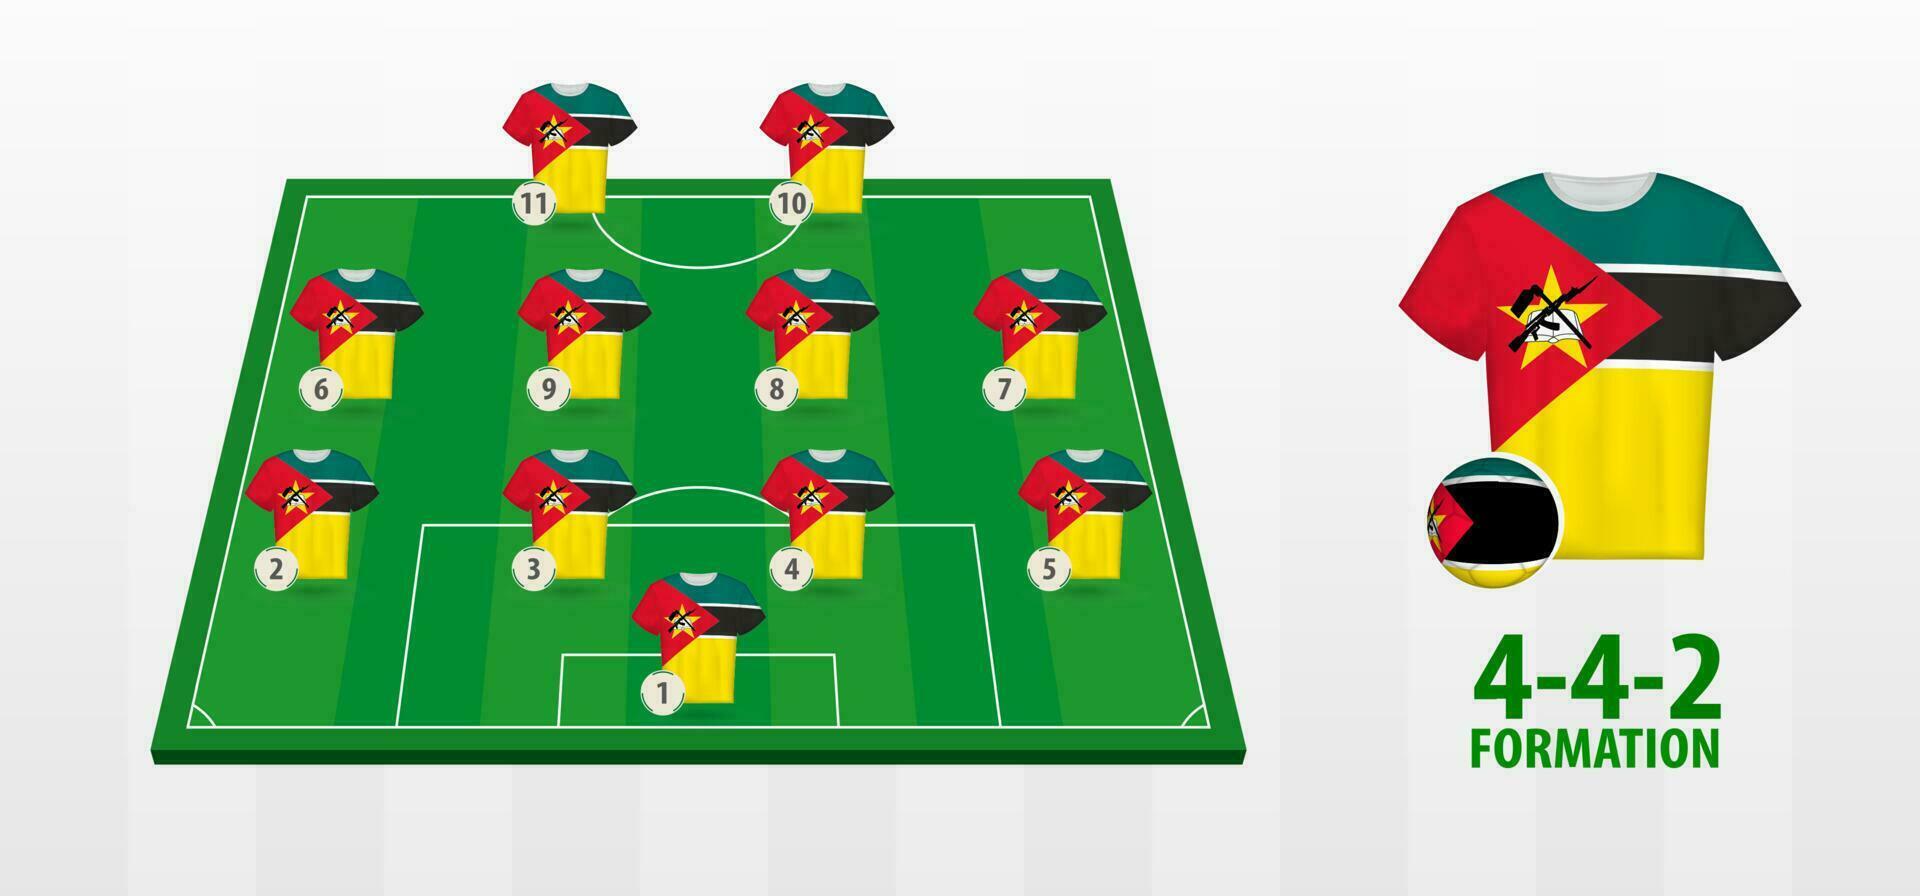 Mozambique National Football Team Formation on Football Field. vector